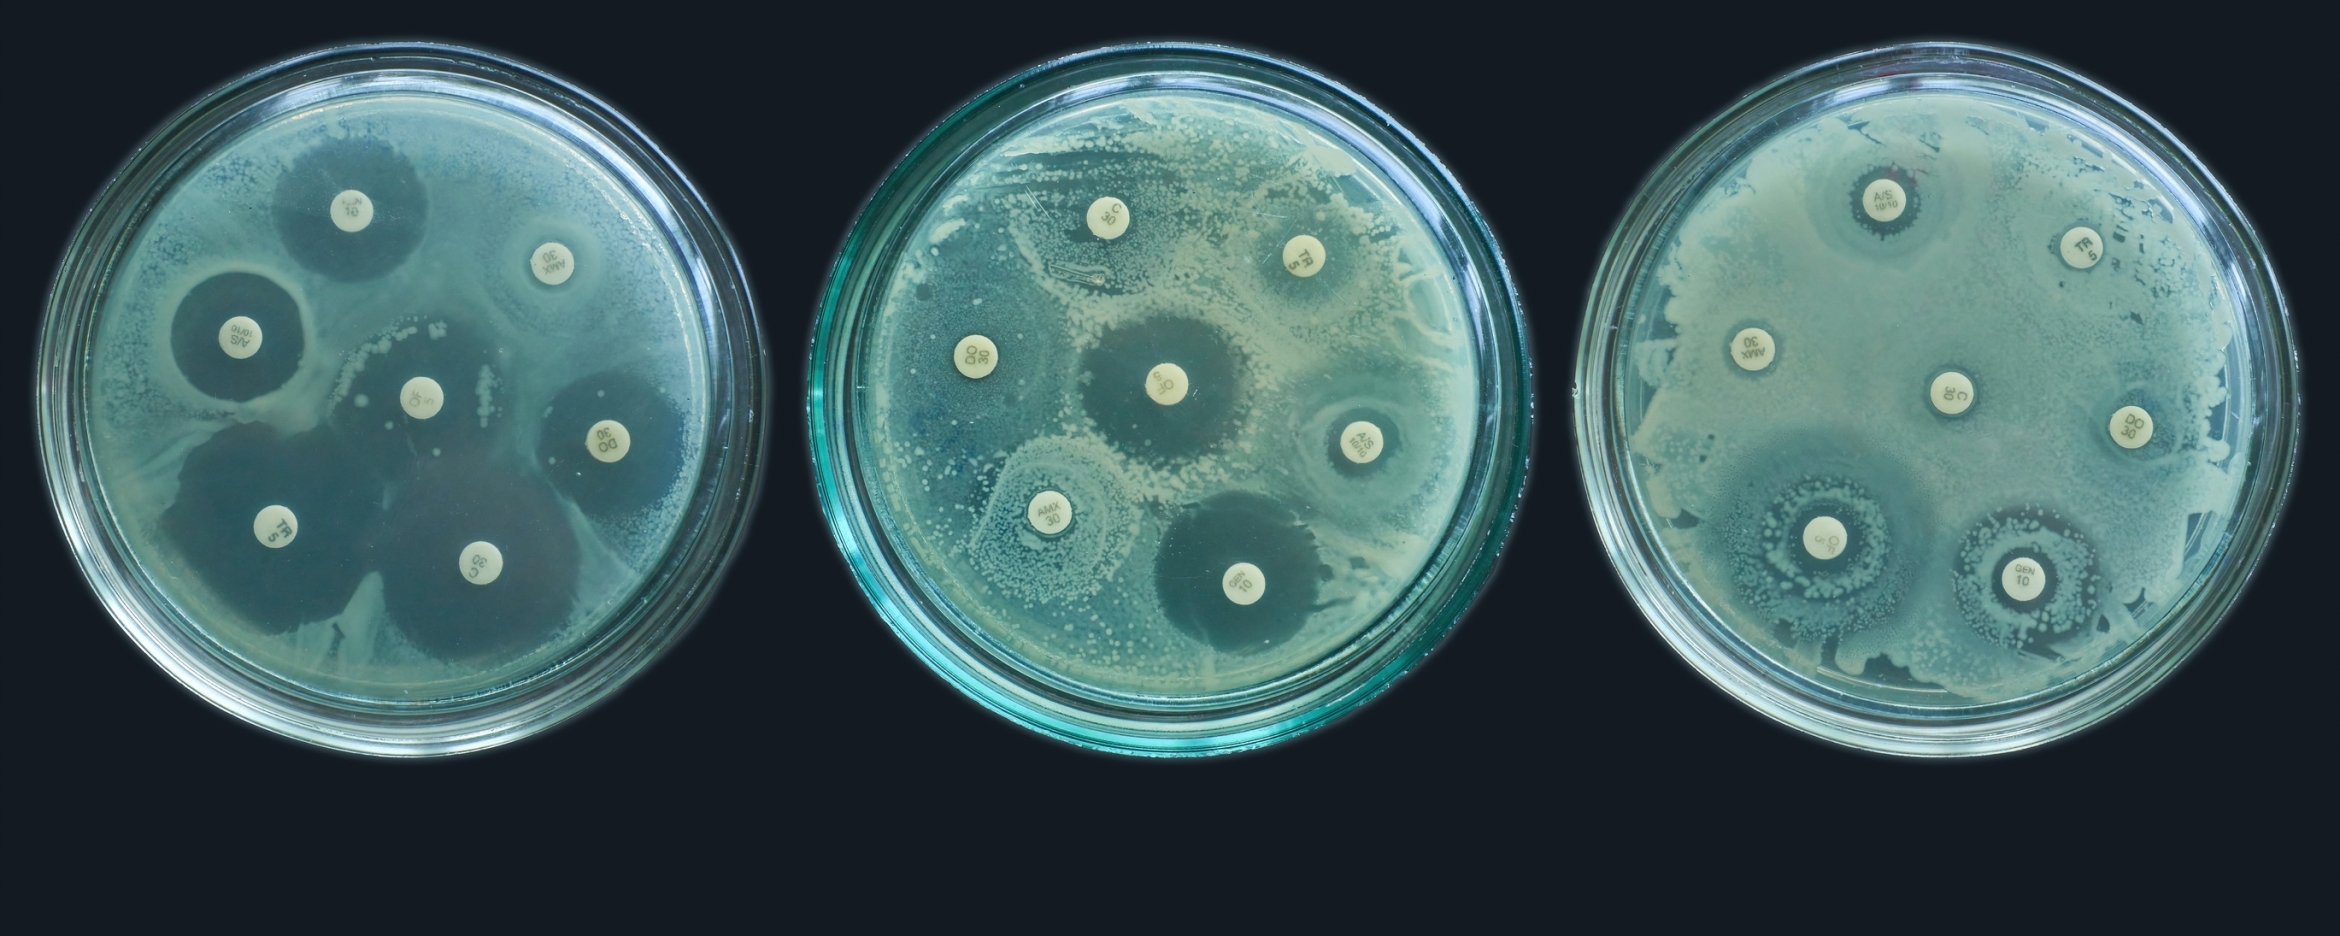 three blue-gray petri dishes against a black background testing the resistance of bacteria to antimicrobials